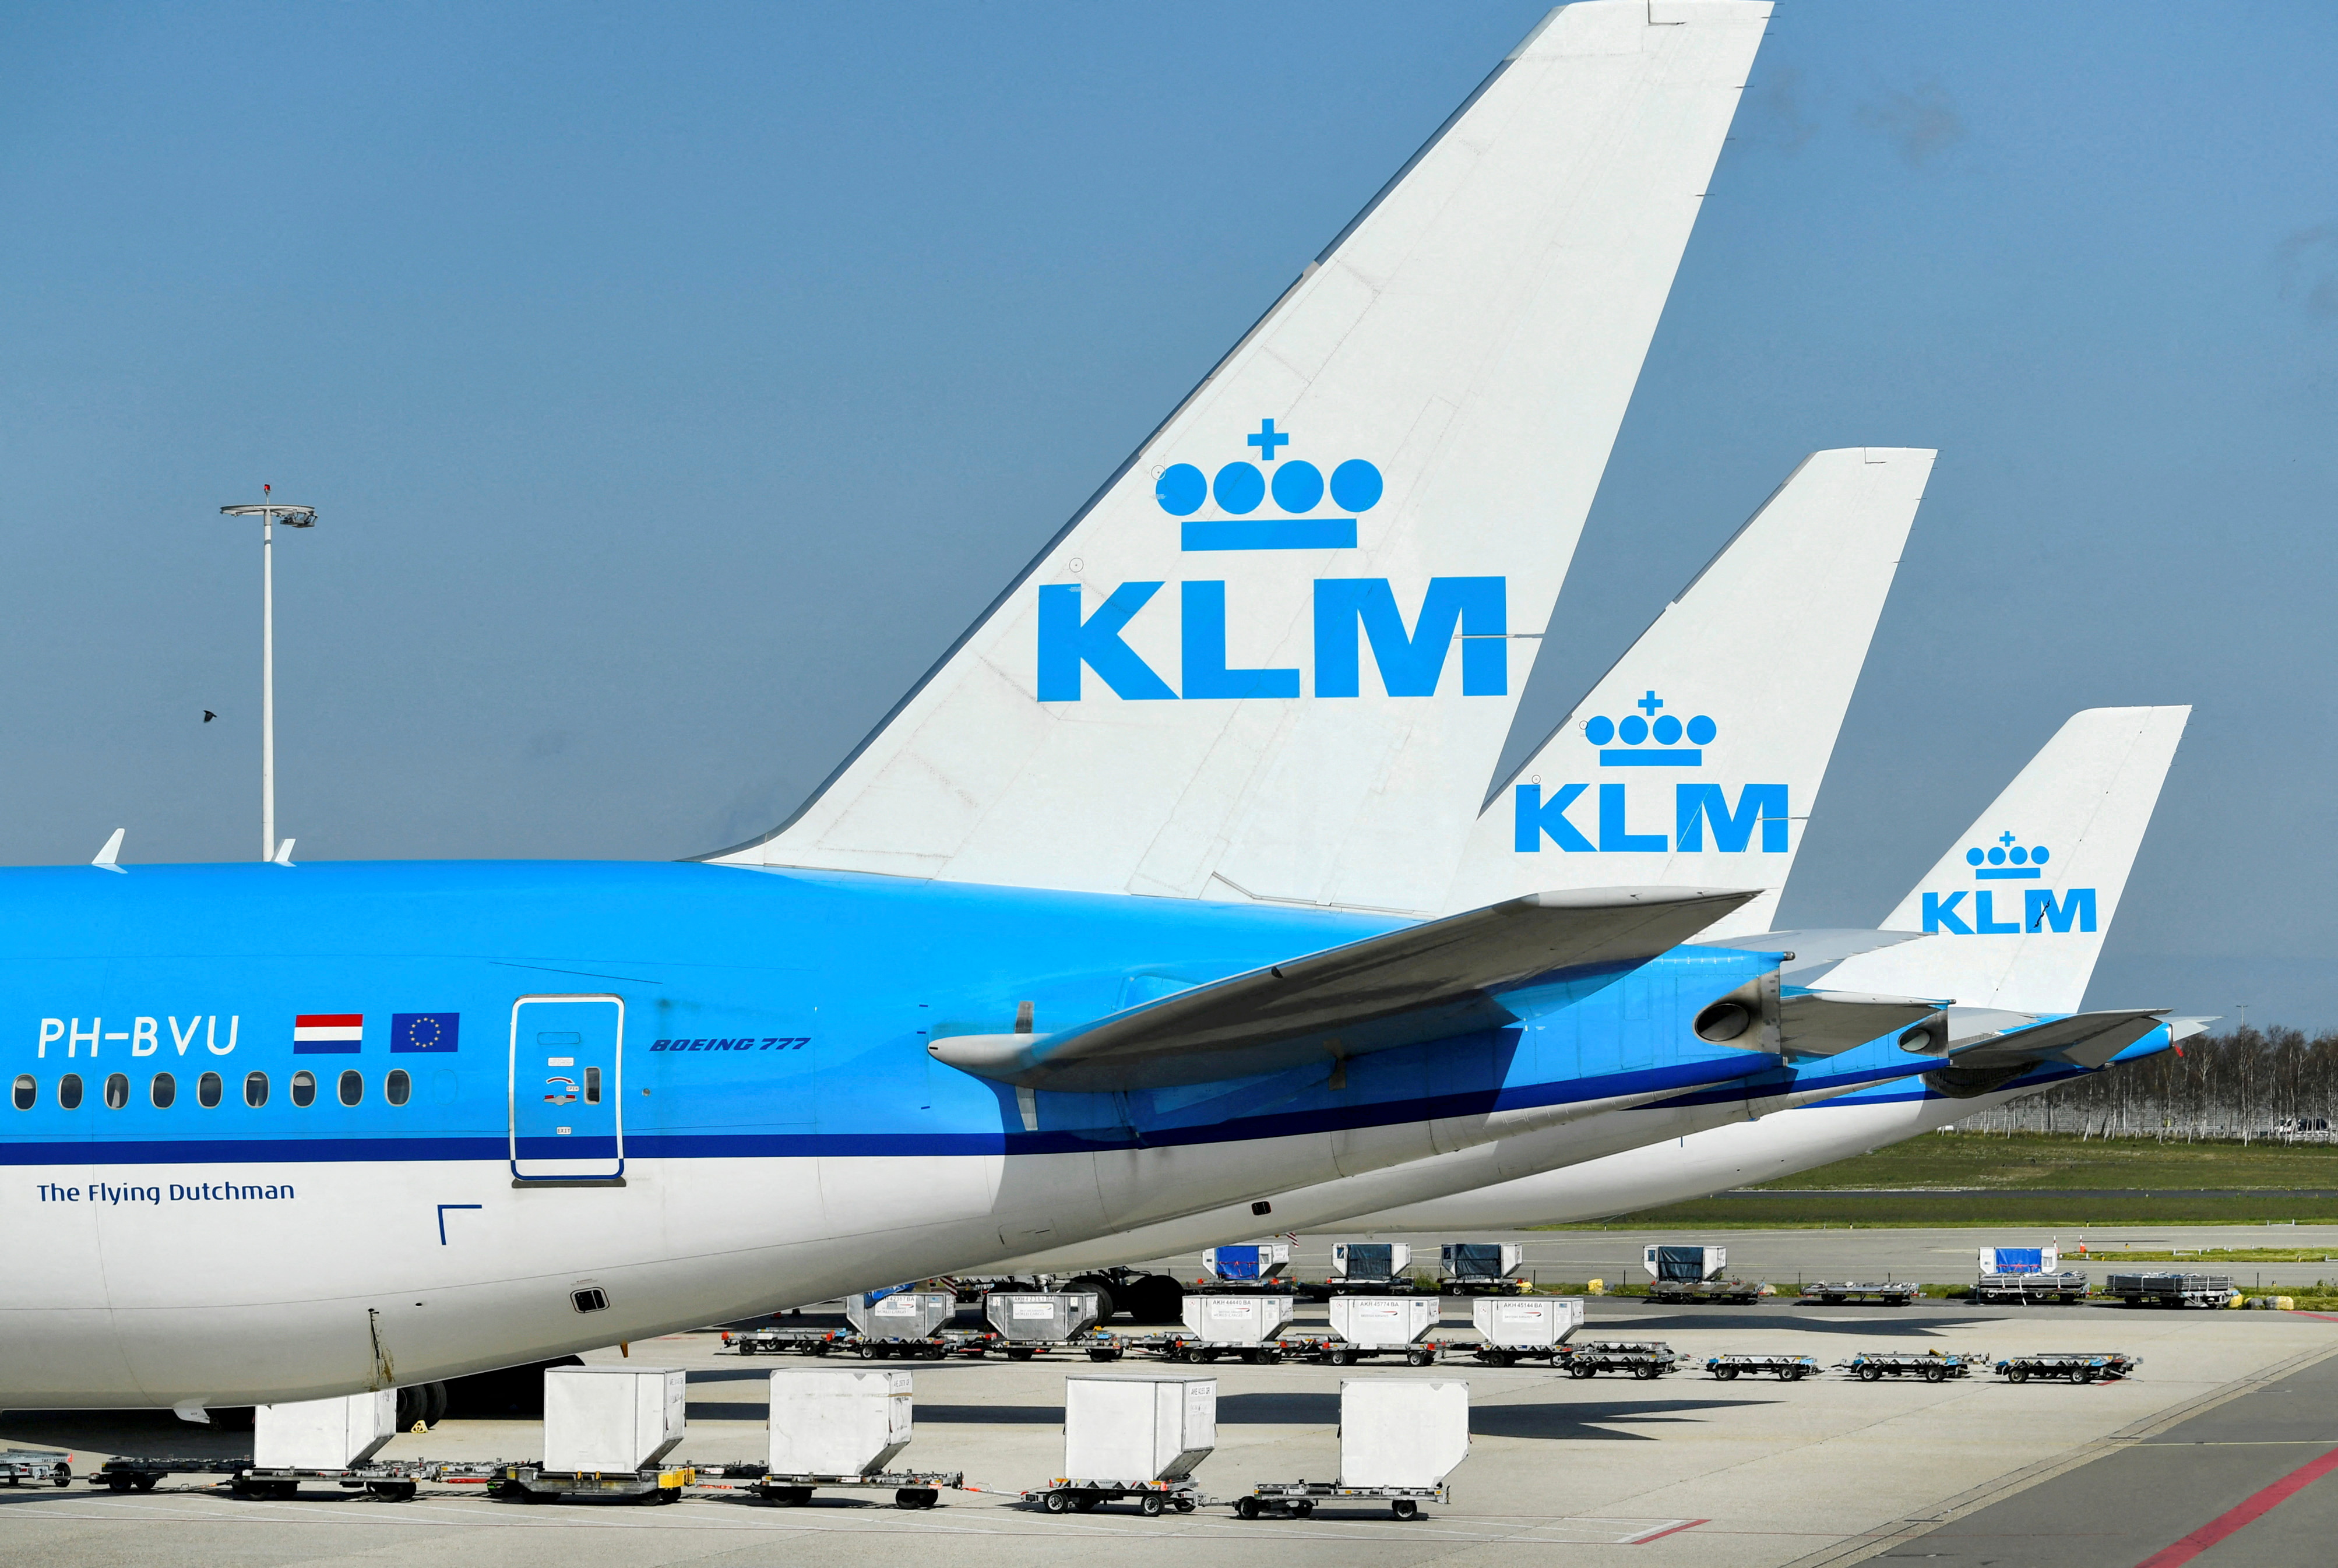 KLM airplanes parked at Schiphol Airport in Amsterdam, Netherlands